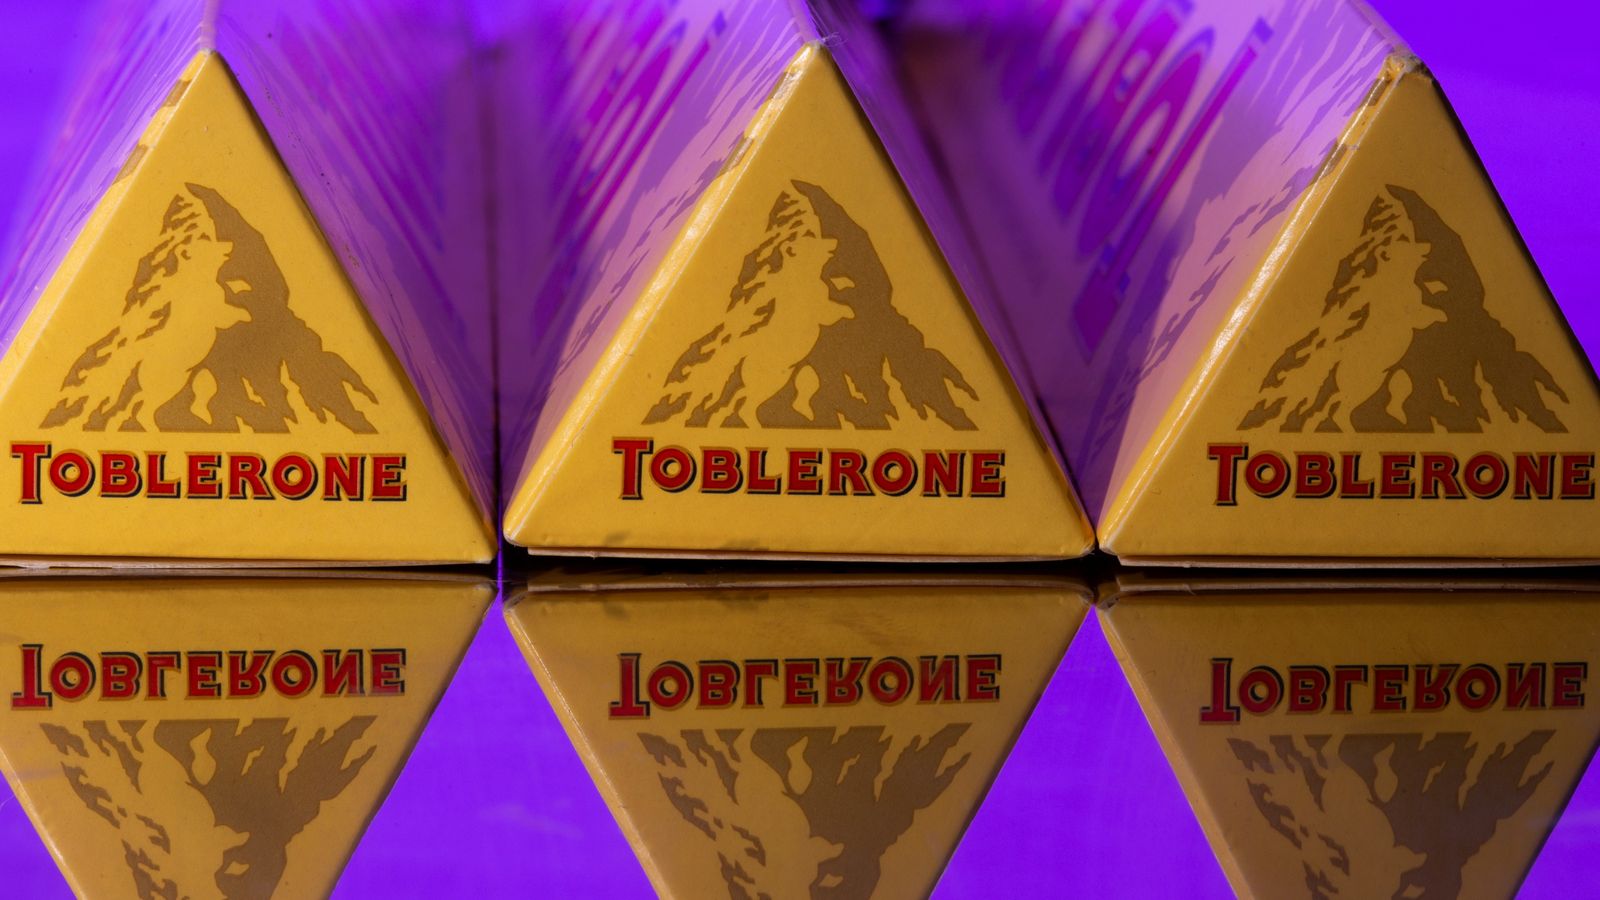 Toblerone Drops Matterhorn from Packaging: What Does It Mean for the Brand?